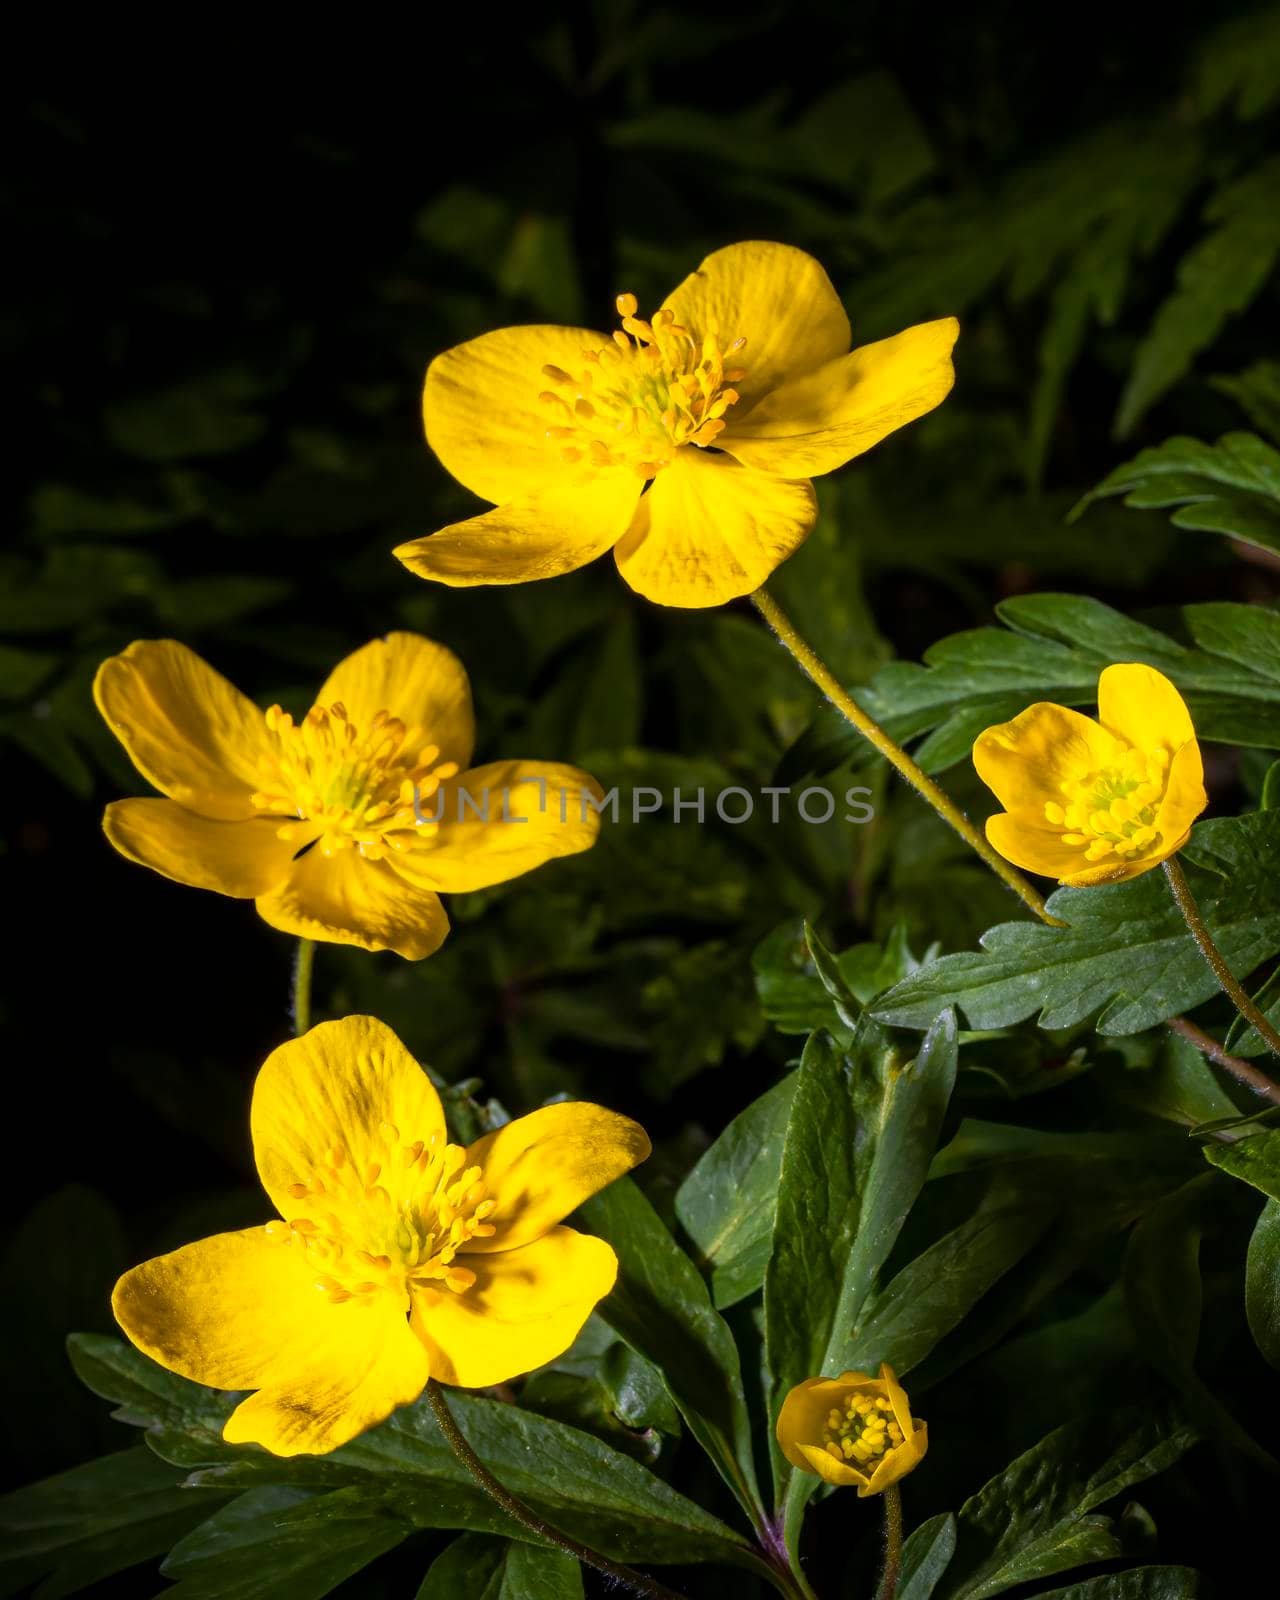 Yellow first spring flowers illuminated by bright light.